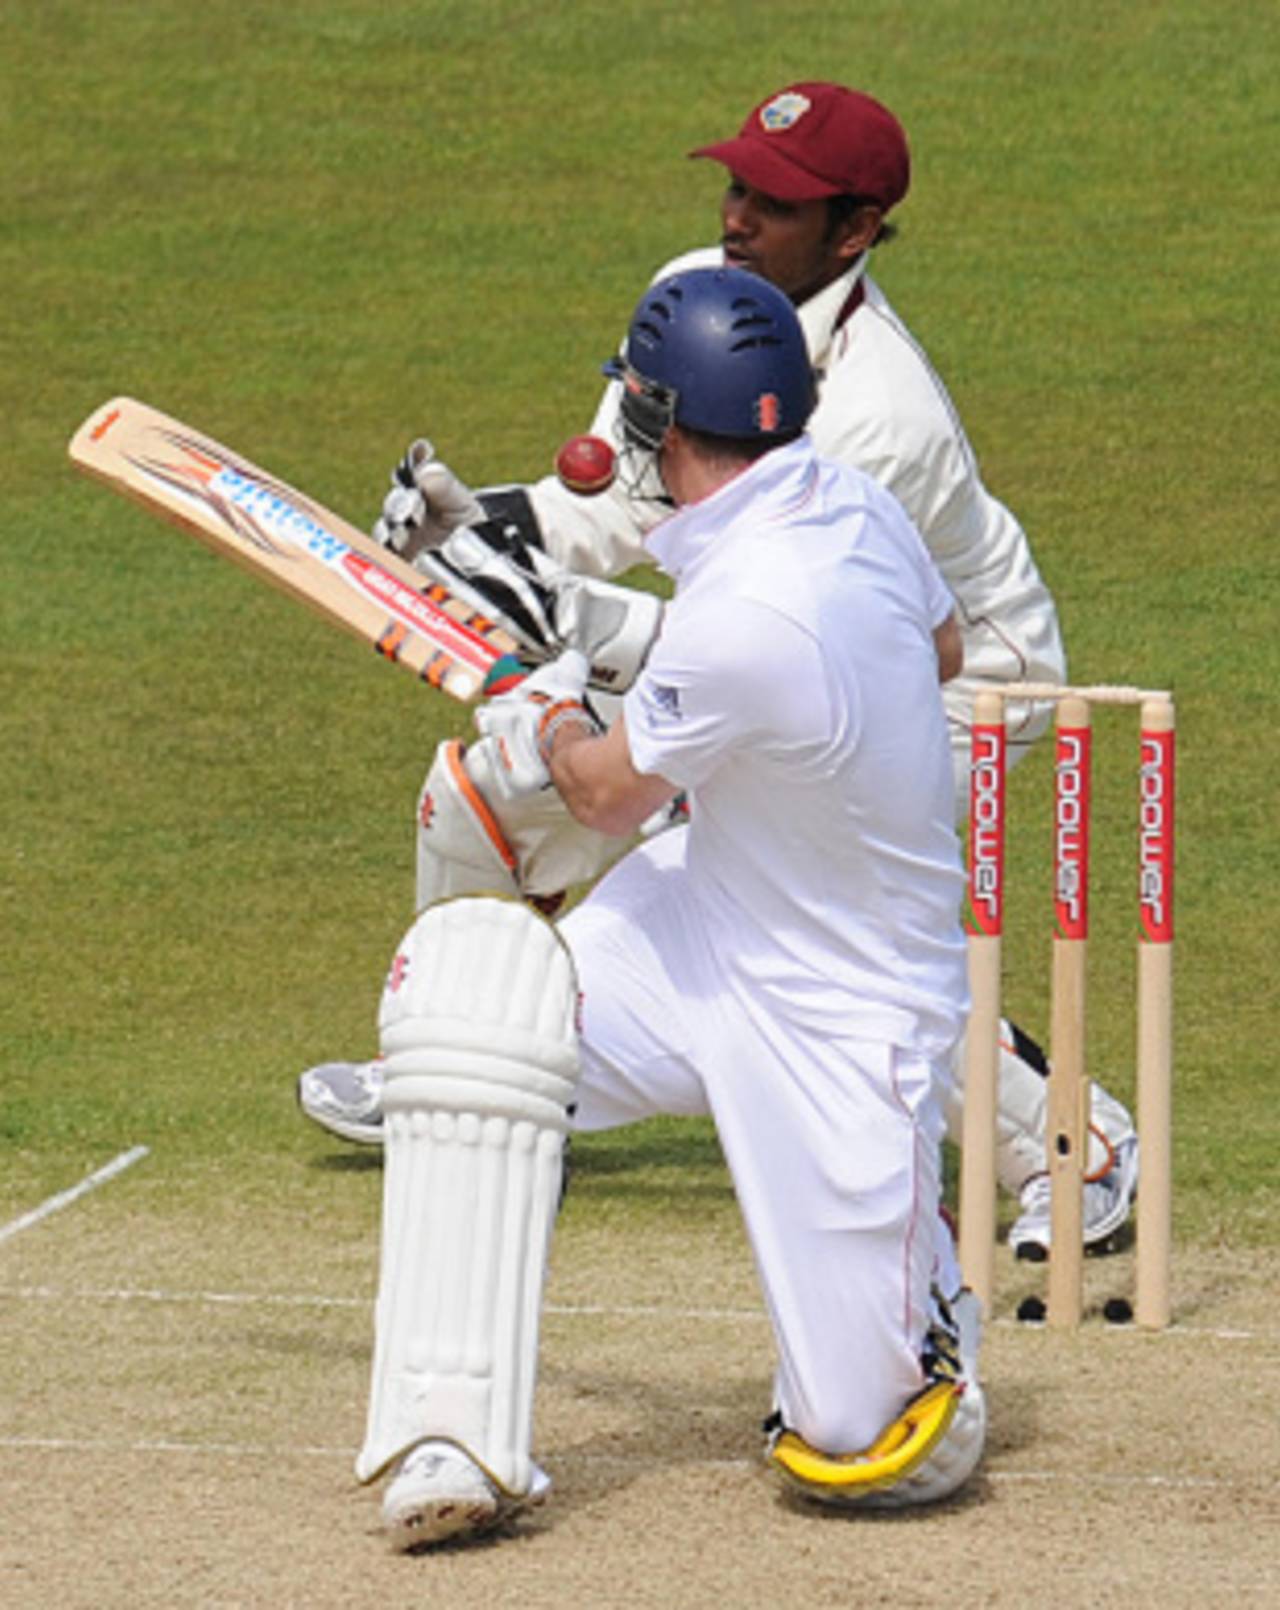 Andrew Strauss goes for a sweep but gloves it behind to Denesh Ramdin, England v West Indies, 2nd Test, Chester-le-Street, May 14, 2009